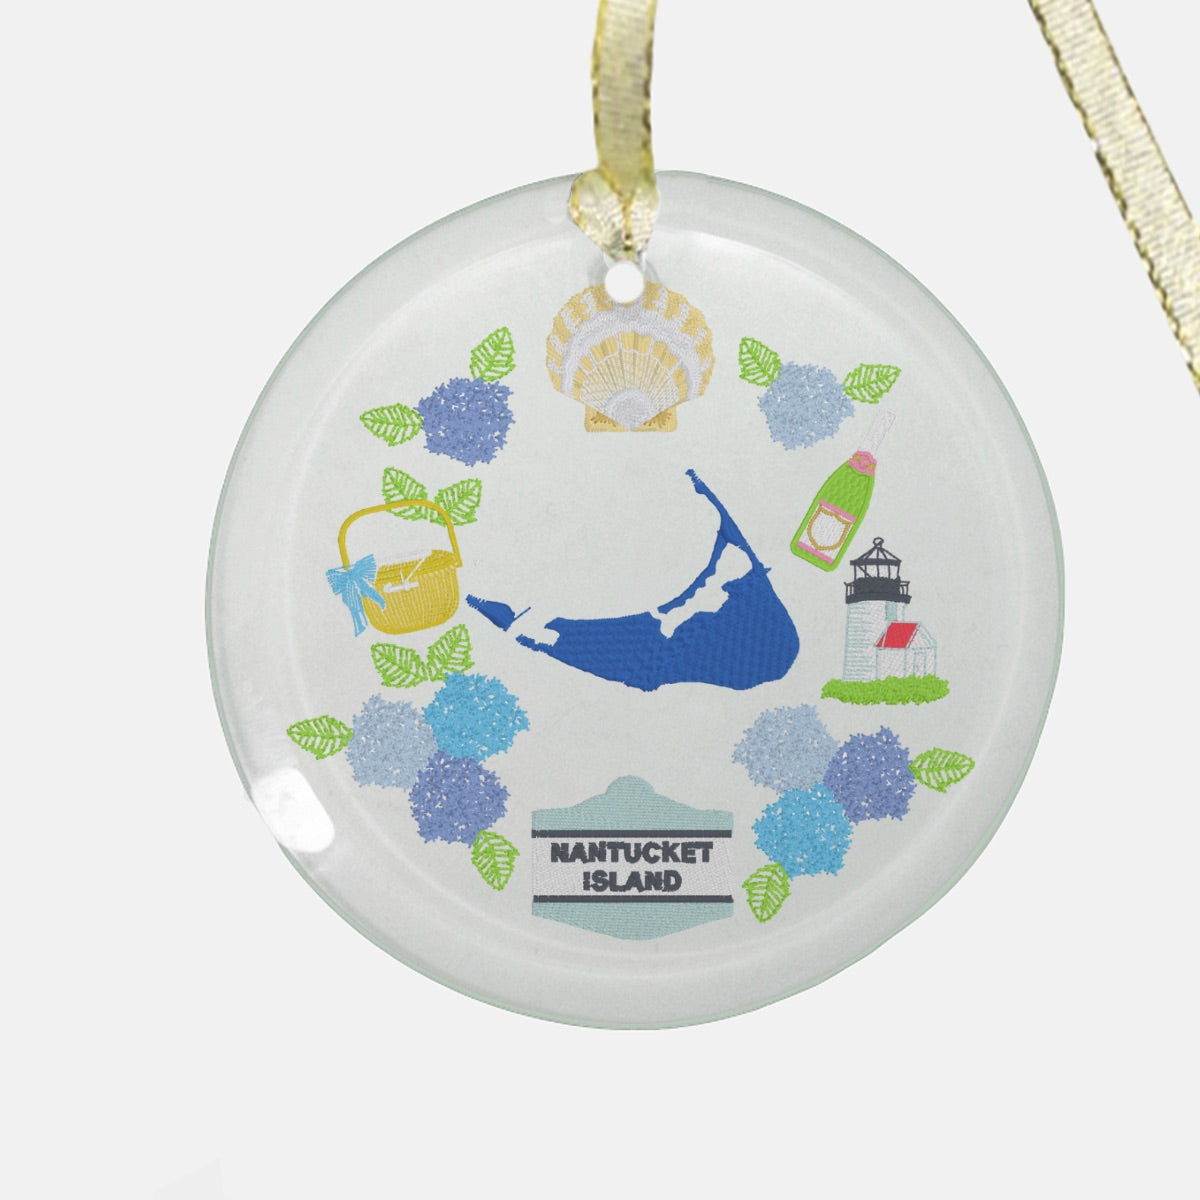 Nantucket Crest Ornament - Clear Glass (Round)